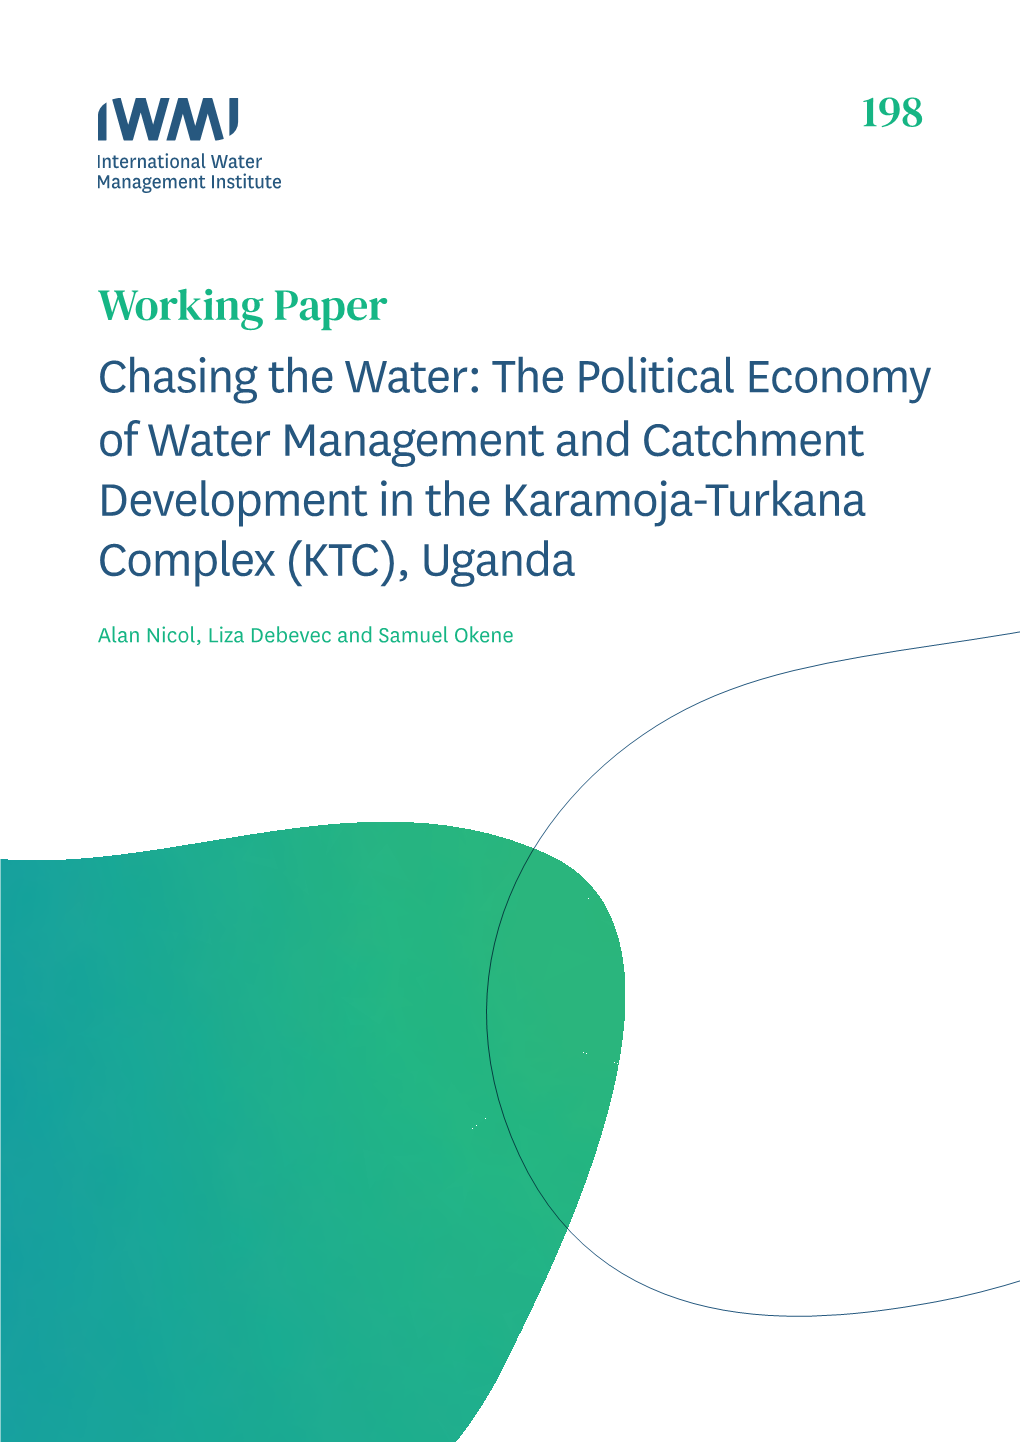 Chasing the Water: the Political Economy of Water Management and Catchment Development in the Karamoja-Turkana Complex (KTC), Uganda